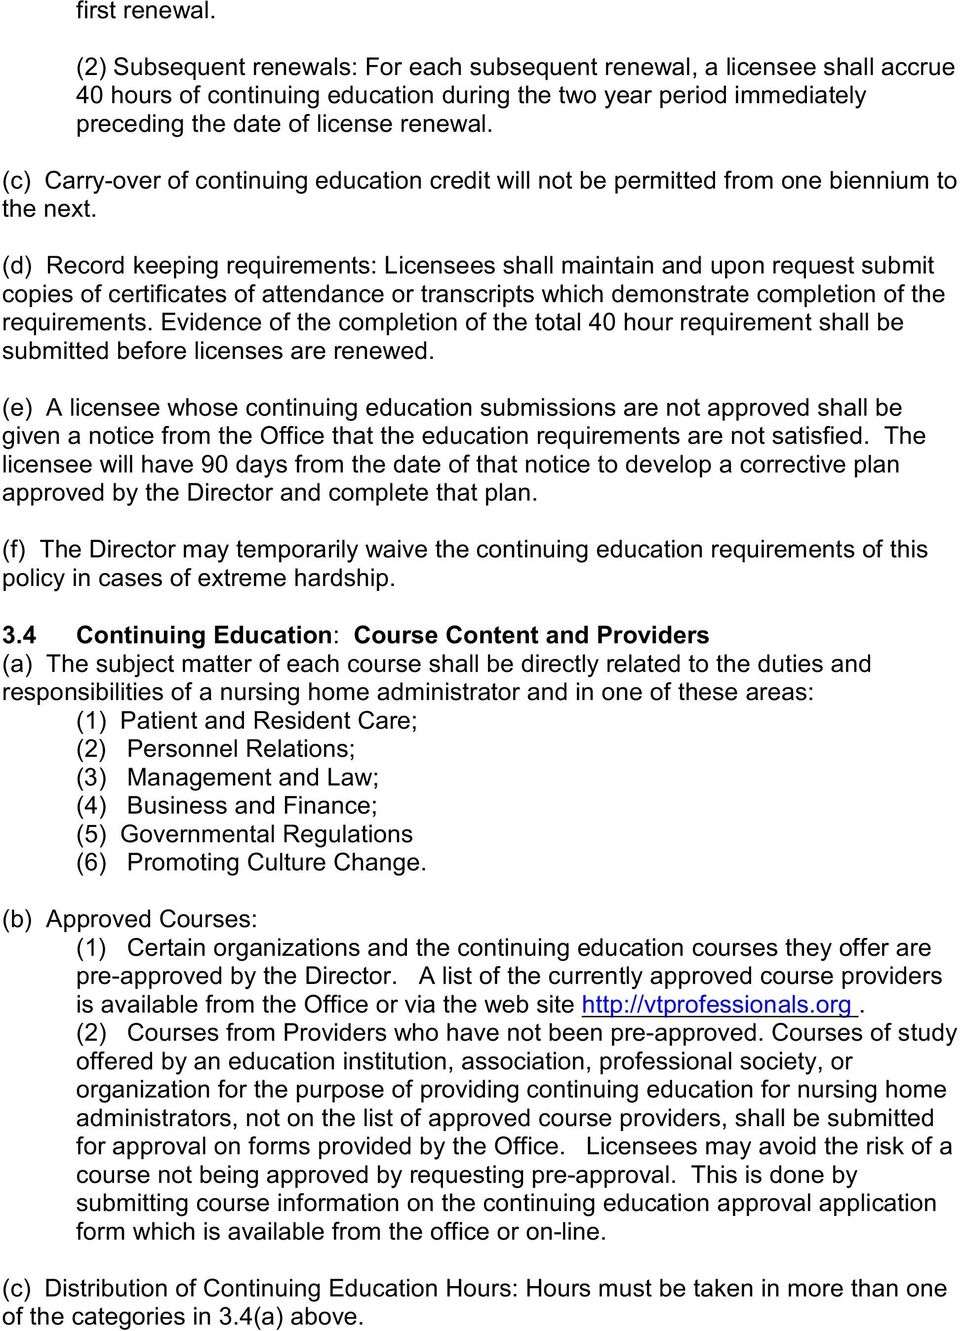 (c) Carry-over of continuing education credit will not be permitted from one biennium to the next.